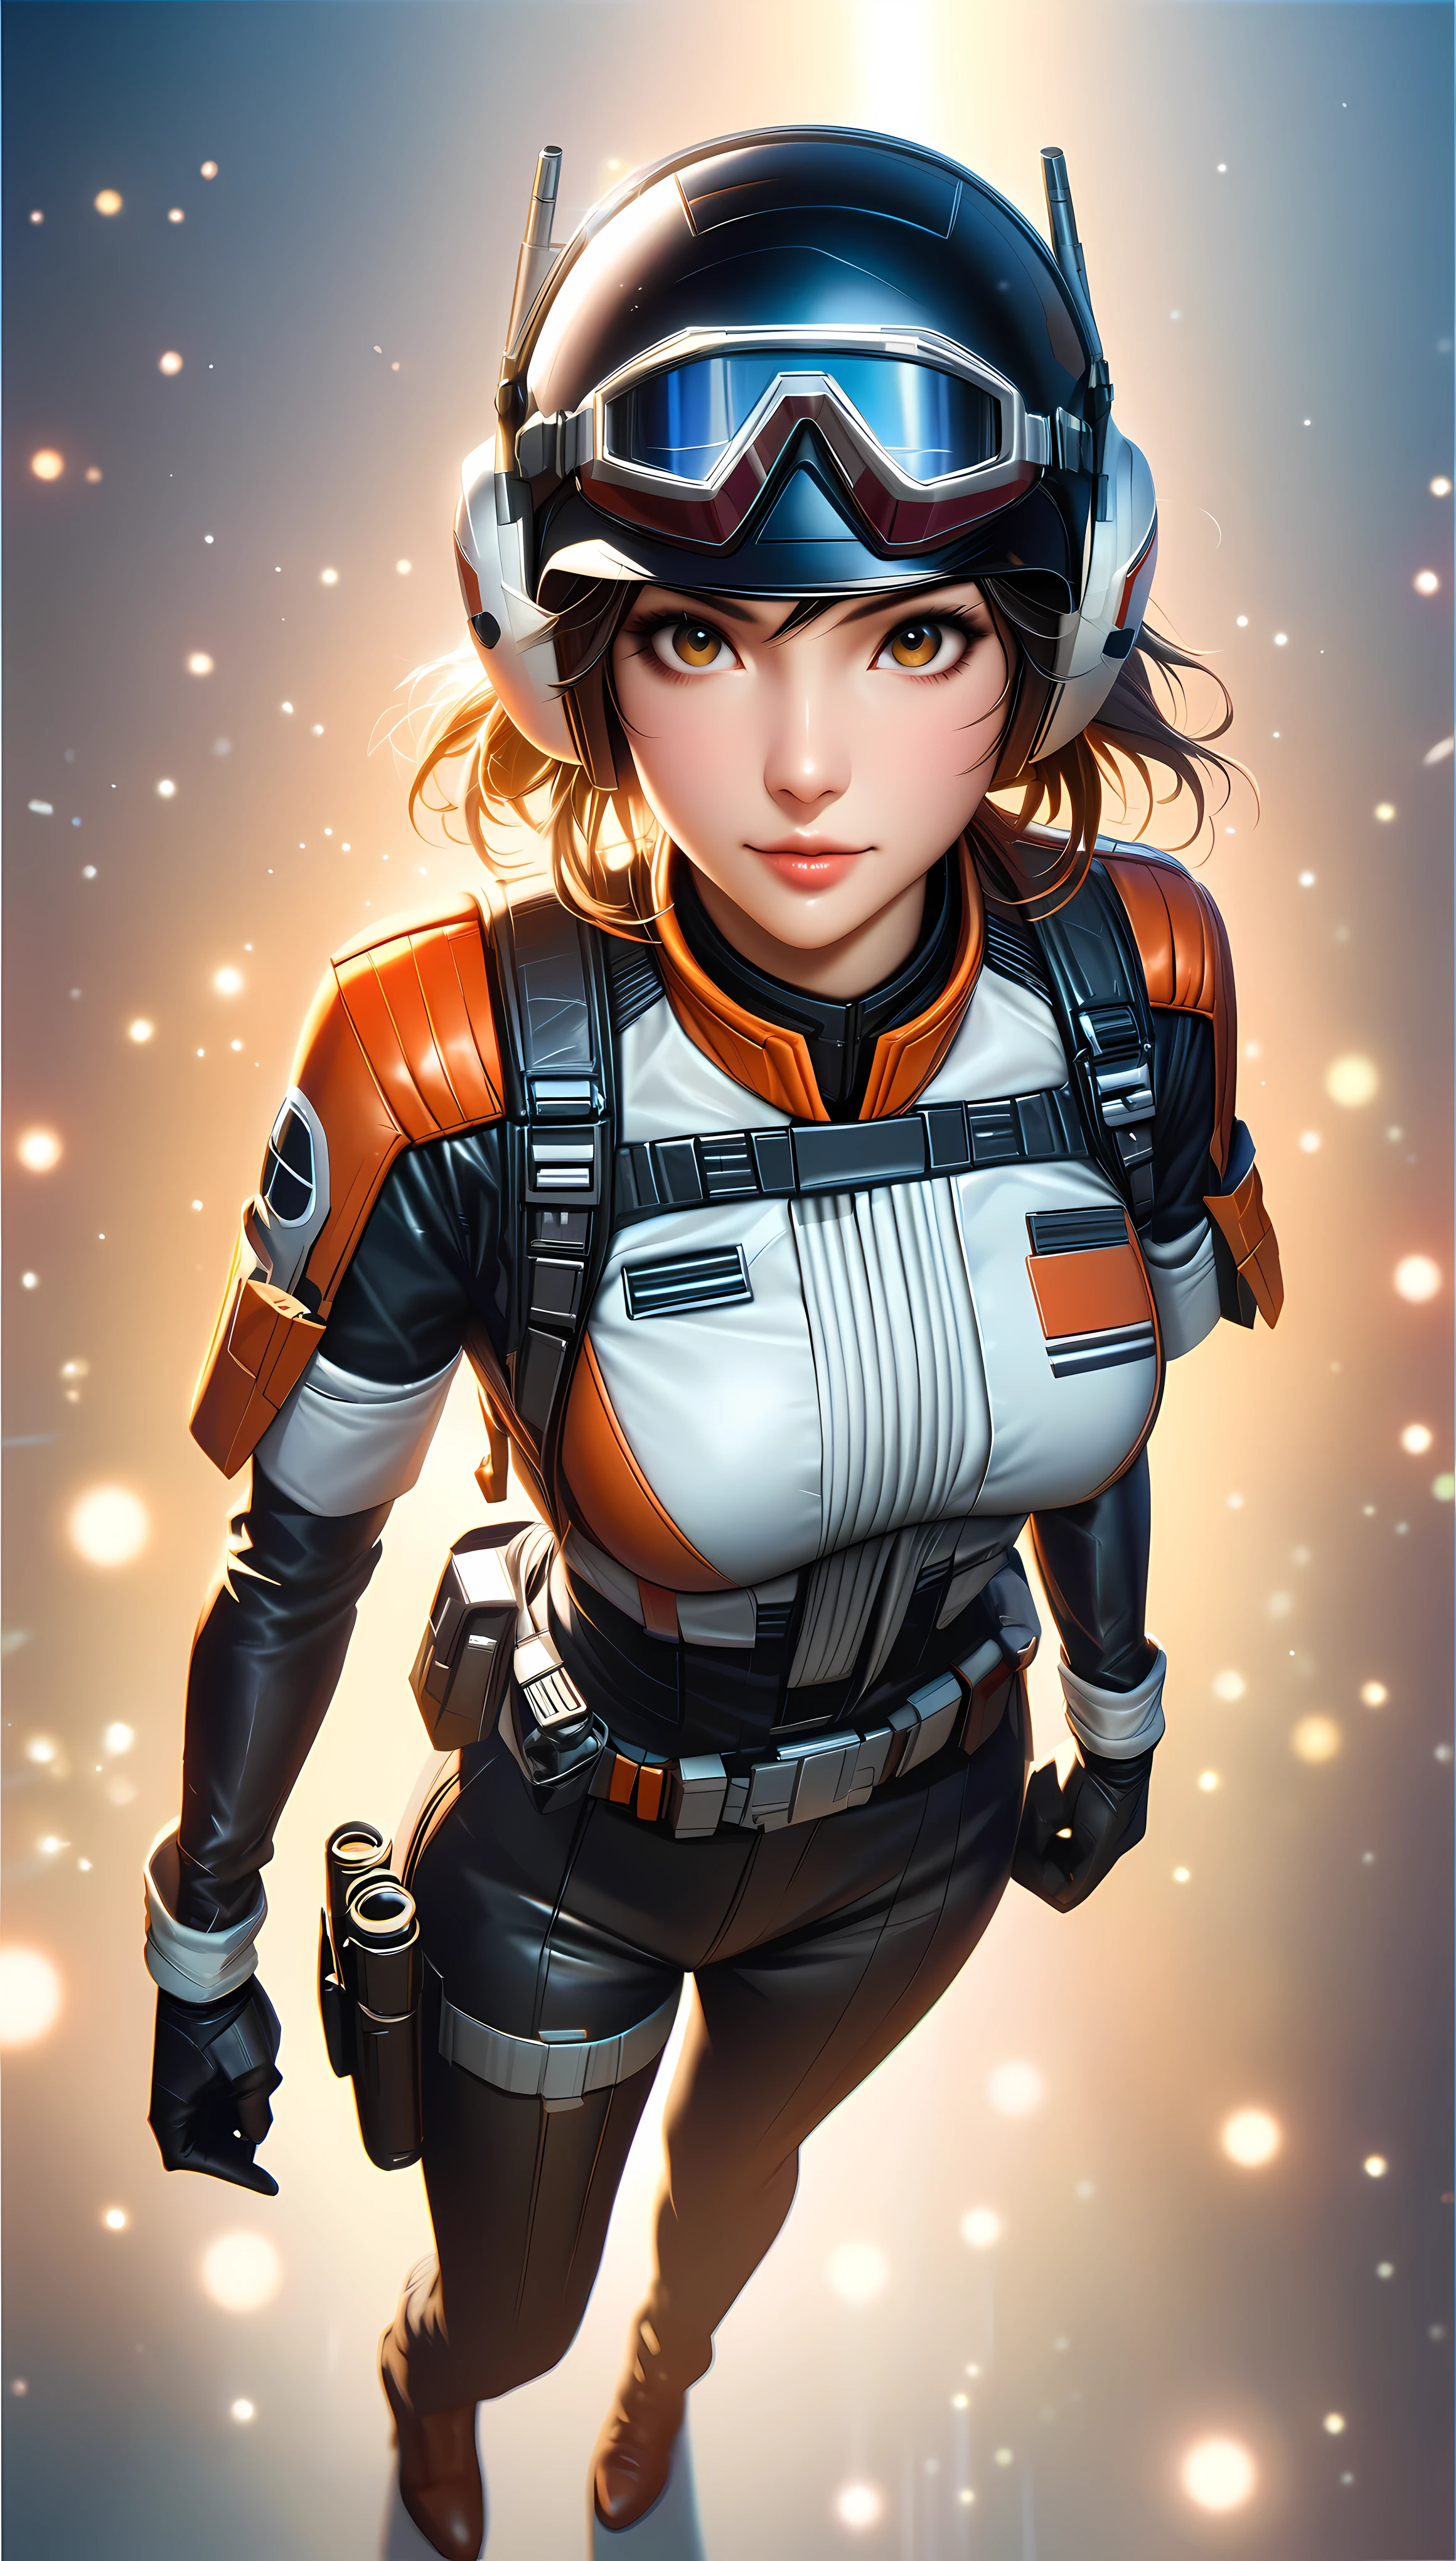 ((Masterpiece in maximum 16K resolution):1.6), ((vector cartoon illustration:)1.5), ((Vector art):1.4), ((Geometric style and minimalism):1.5), ((Wide angle painting):1.2), ((Vectorized):1.2) | ((Vector art of a A rebel alliance pilot in a Star Wars themed scene, wearing a detailed uniform with a flight helmet and goggles:1.5), (Supermodel beauty with braided blonde hair and aquiline nose), ((Full body):1.5), ((Detailed Star Wars Rebel Pilot Uniform):1.2), ((tyndall effect):1.1), ((golden hour):1.2), ((sense of action):1.1), (shimmer), (visual experience), (Realism), (Realistic), award-winning graphics, dark shot, film grain, extremely detailed, Digital Art, rtx, Unreal Engine, scene concept anti glare effect, All captured with sharp focus. Rendered in ultra-high definition with UHD and retina quality, this masterpiece ensures anatomical correctness and textured skin with super detail. With a focus on high quality and accuracy, this award-winning portrayal captures every nuance in stunning 16k resolution, immersing viewers in its lifelike depiction. Avoid extreme angles or exaggerated expressions to maintain realism. ((perfect_composition, perfect_design, perfect_layout, perfect_detail, ultra_detailed)), ((enhance_all, fix_everything)), More Detail, Enhance. Rendered in ultra-high definition with UHD and retina quality, this masterpiece ensures anatomical correctness and textured skin with super detail. With a focus on high quality and accuracy, this award-winning portrayal captures every nuance in stunning 16k resolution, immersing viewers in its lifelike depiction. Avoid extreme angles or exaggerated expressions to maintain realism. ((perfect_composition, perfect_design, perfect_layout, perfect_detail, ultra_detailed)), ((enhance_all, fix_everything)), More Detail, Enhance.